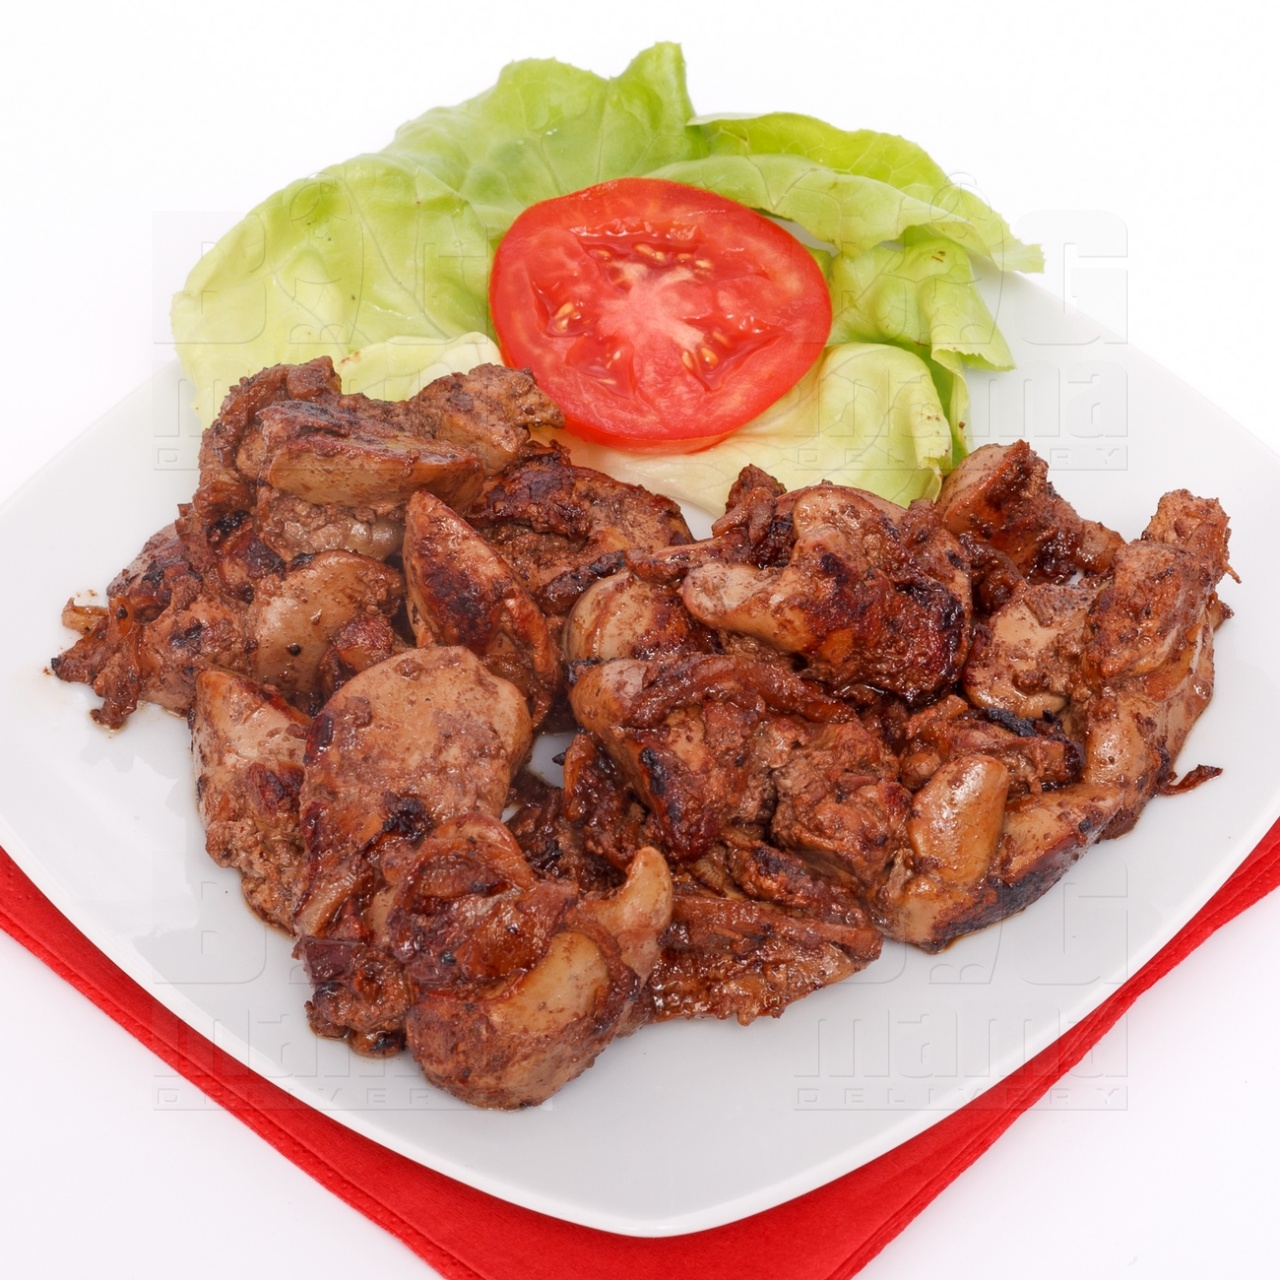 Product #11 image - Chicken liver